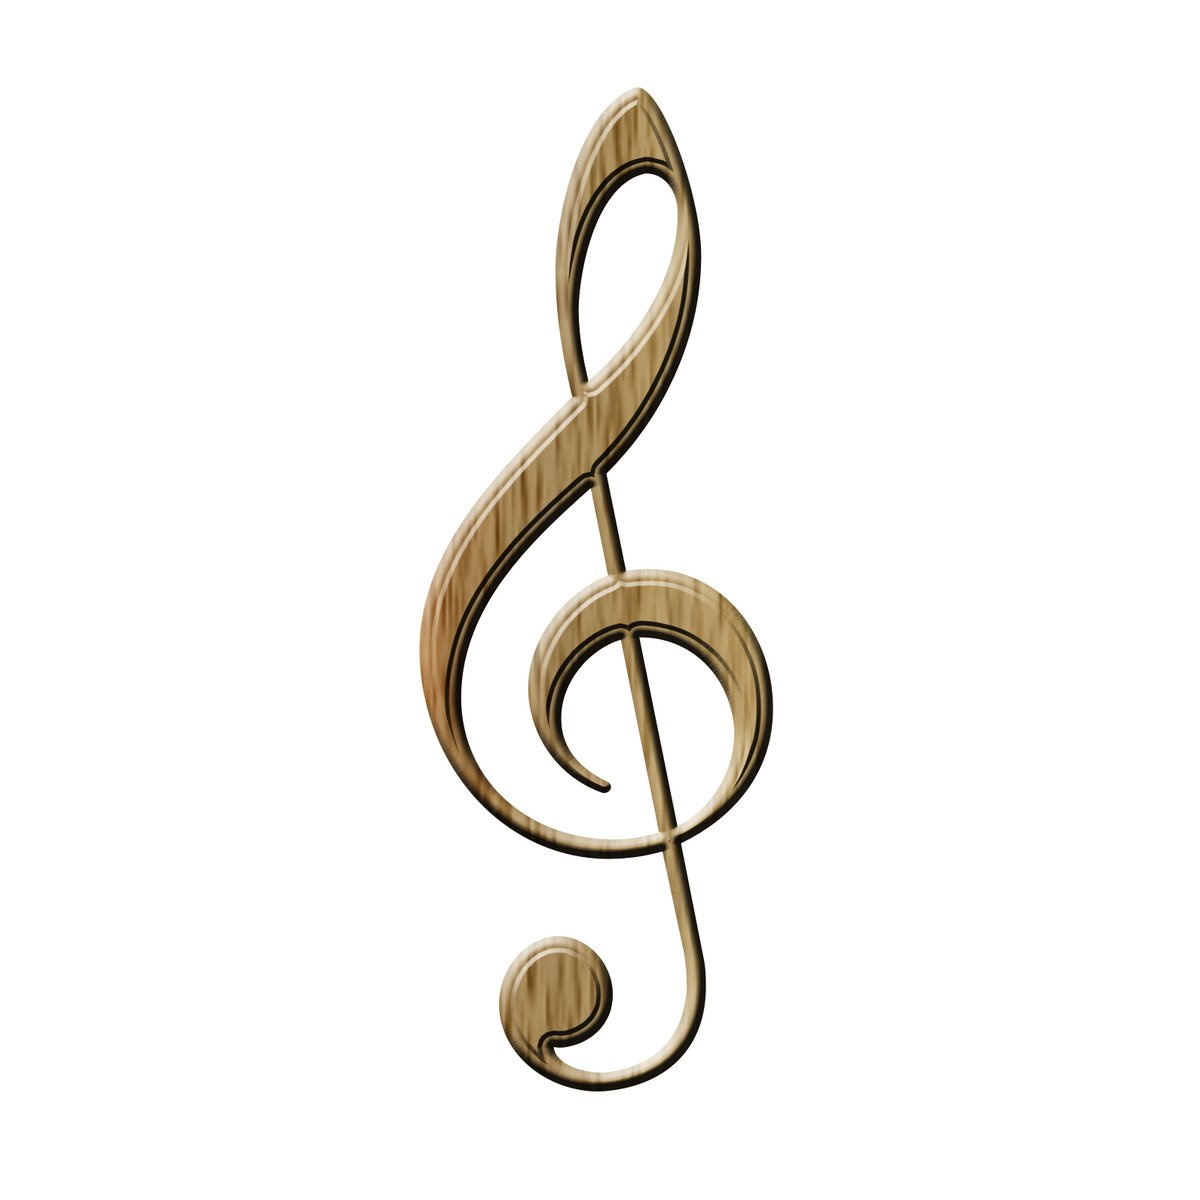 a wooden musical note symbol on a white background